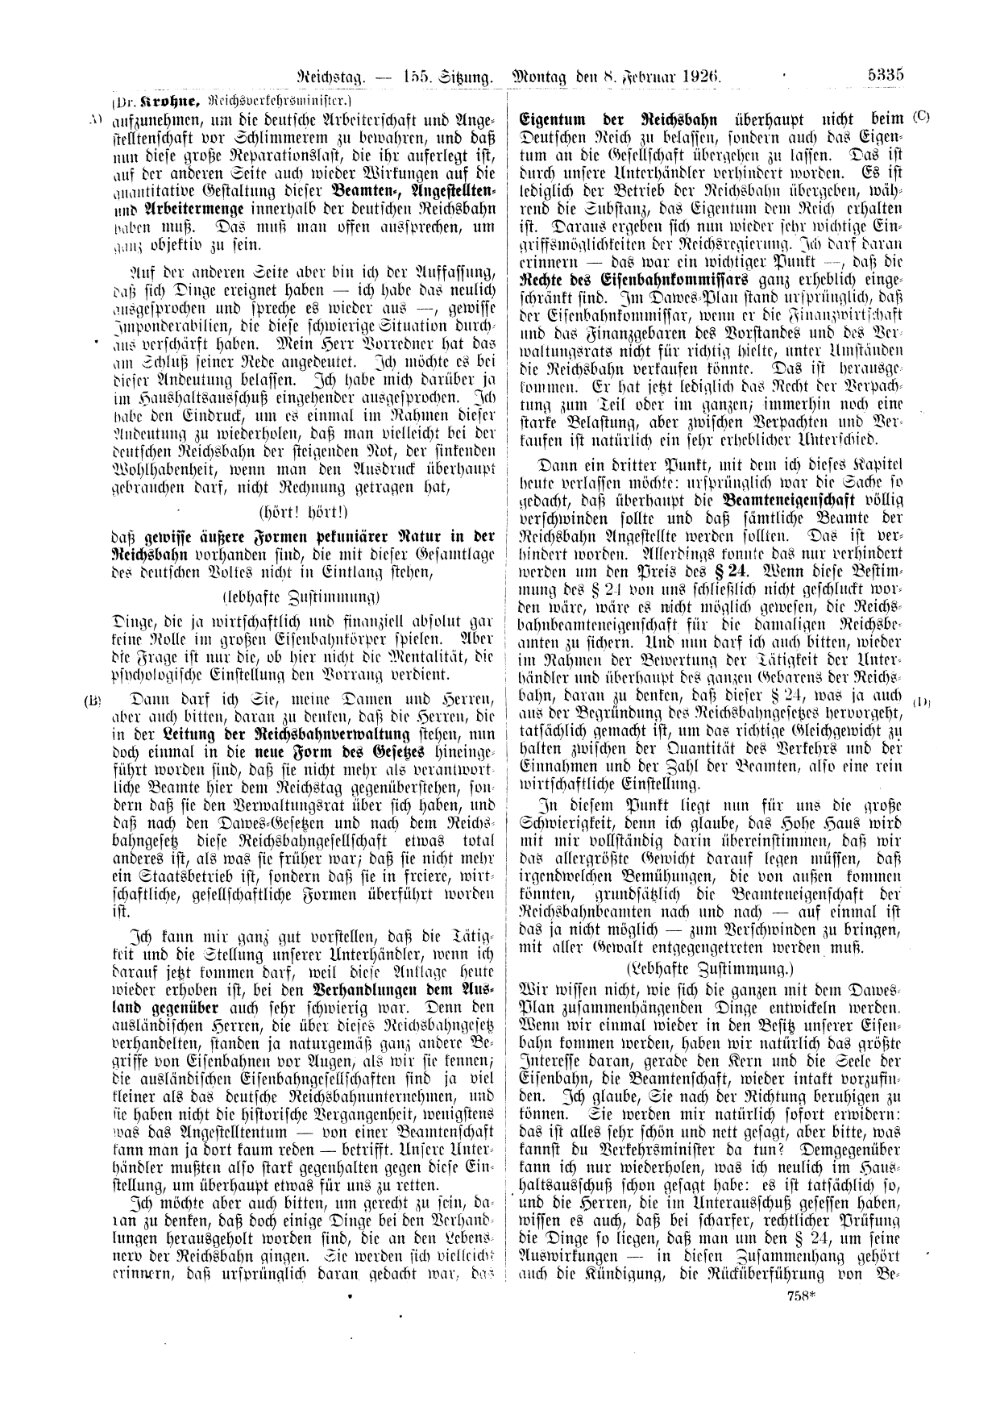 Scan of page 5335